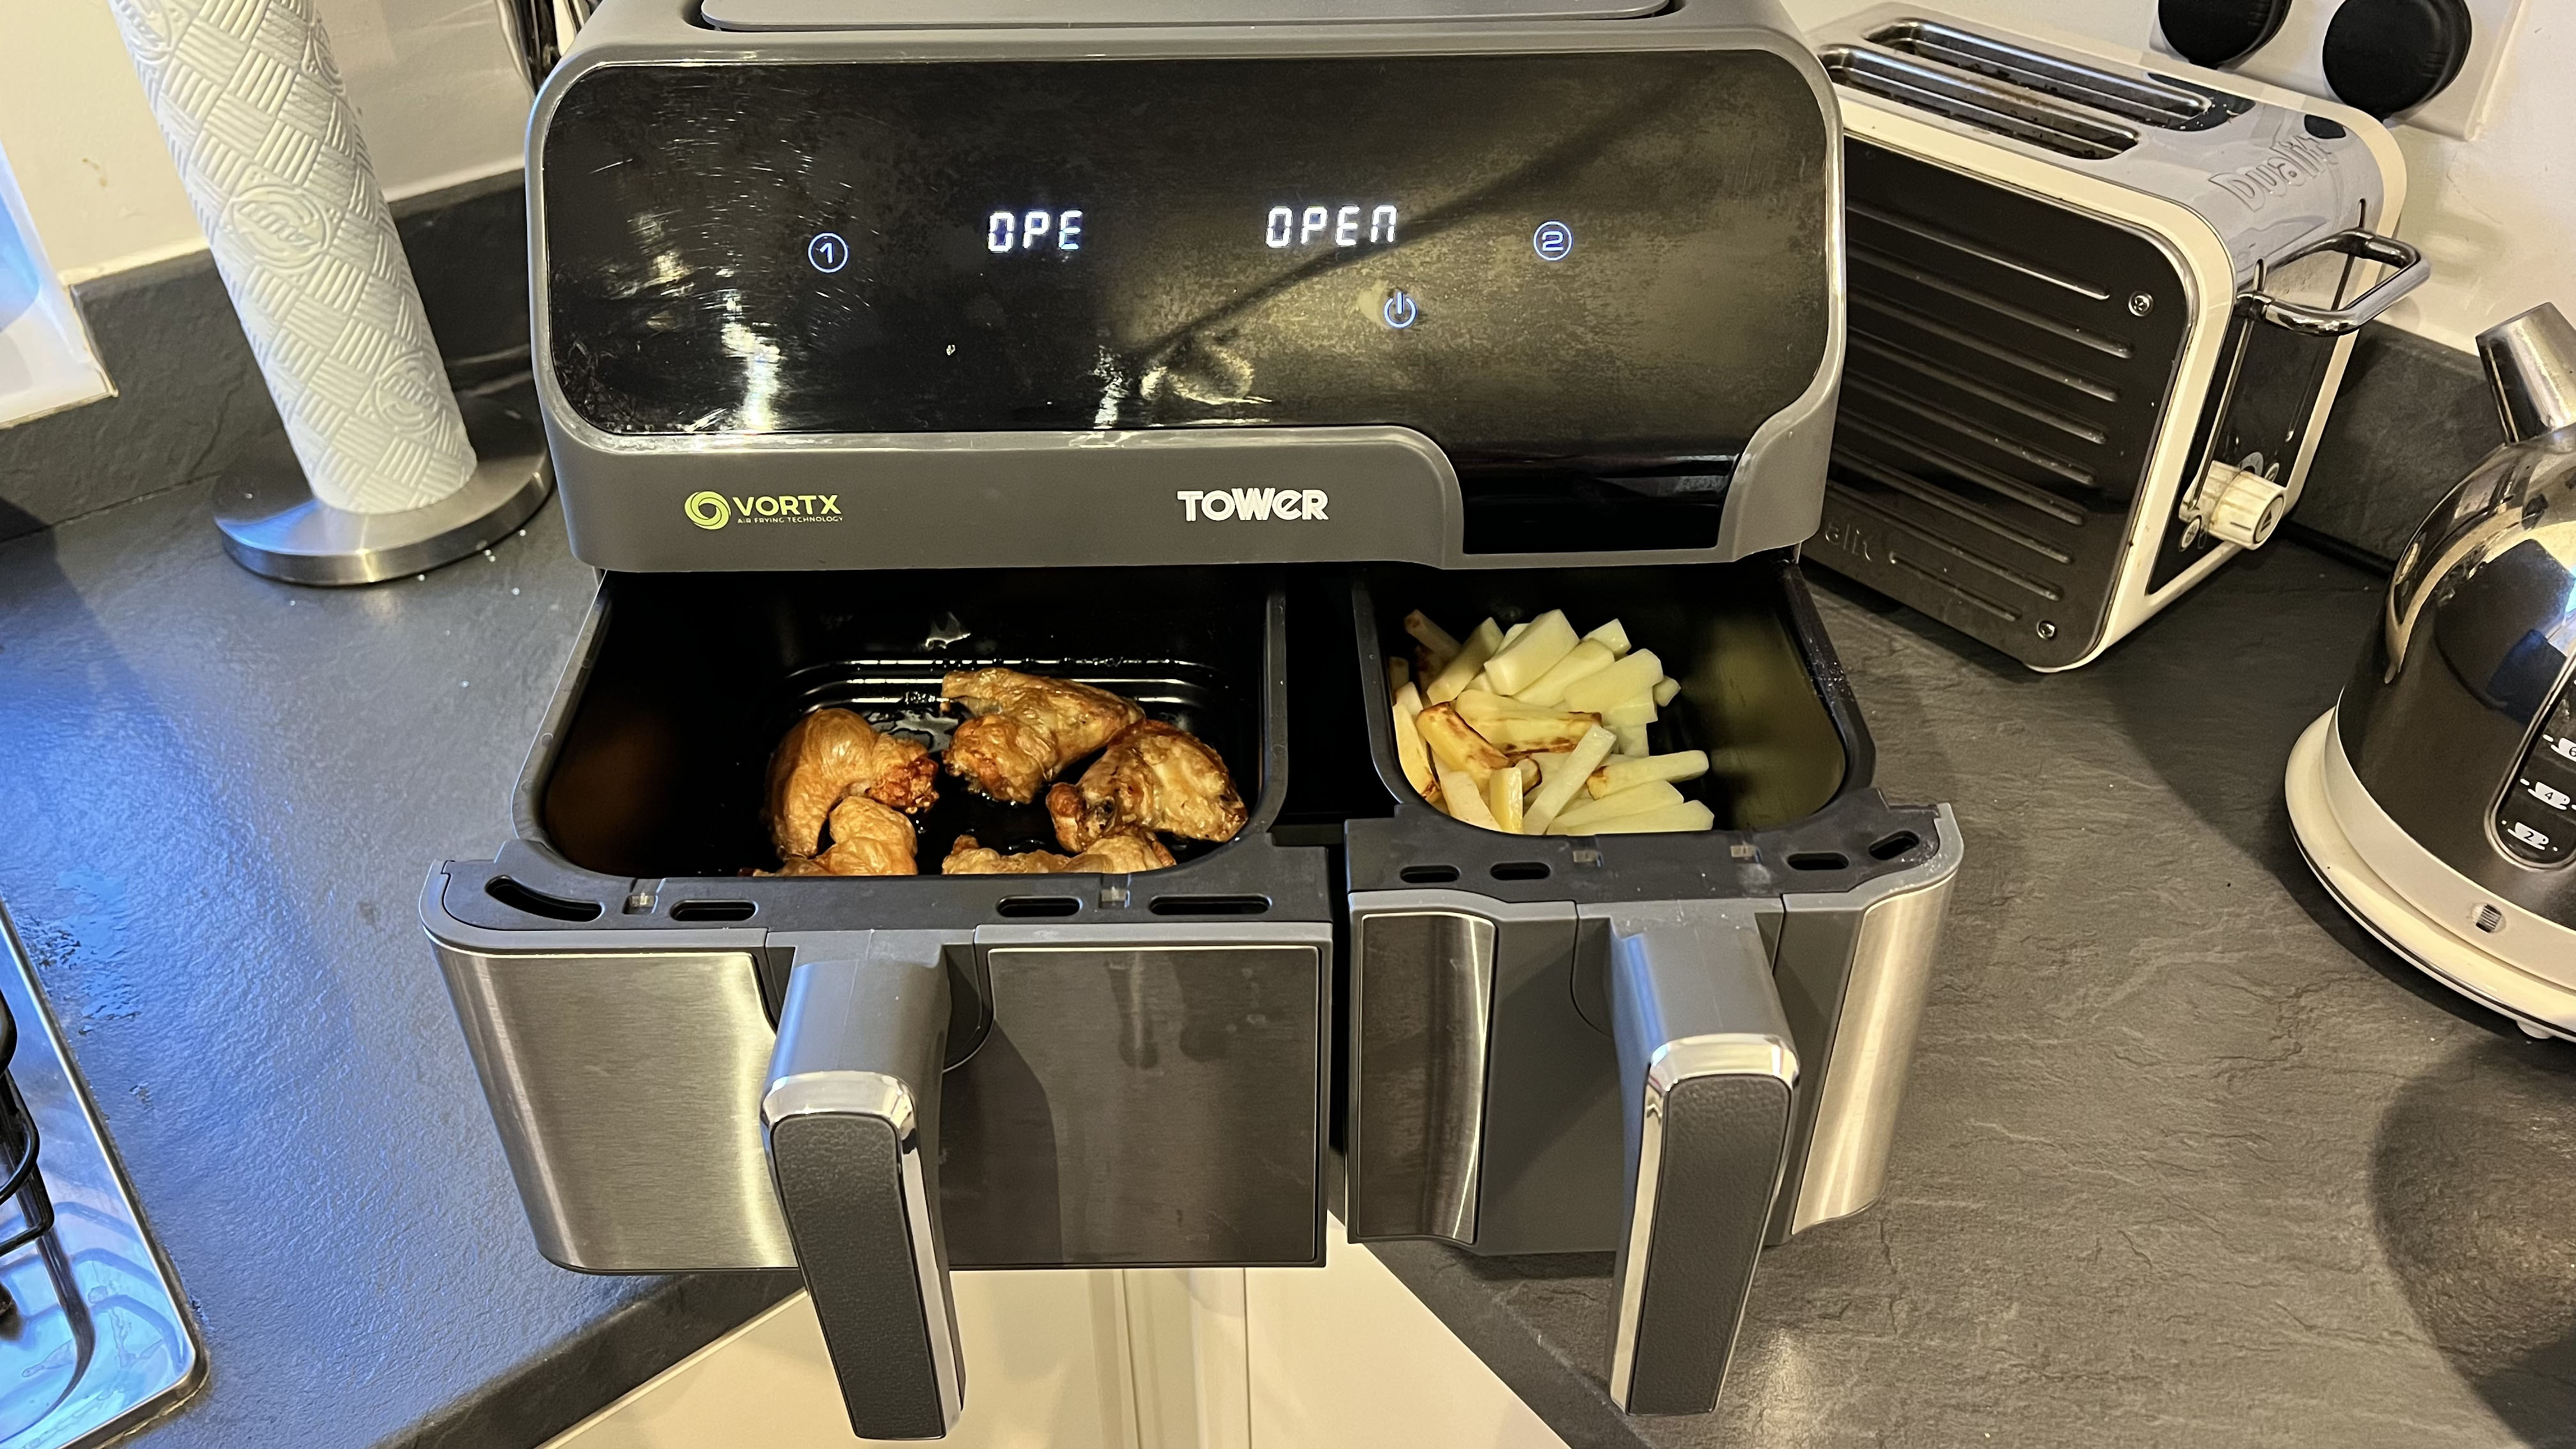 Chicken wings and homemade chips are shown side by side in the Tower Vortx Eco Duo air fryer